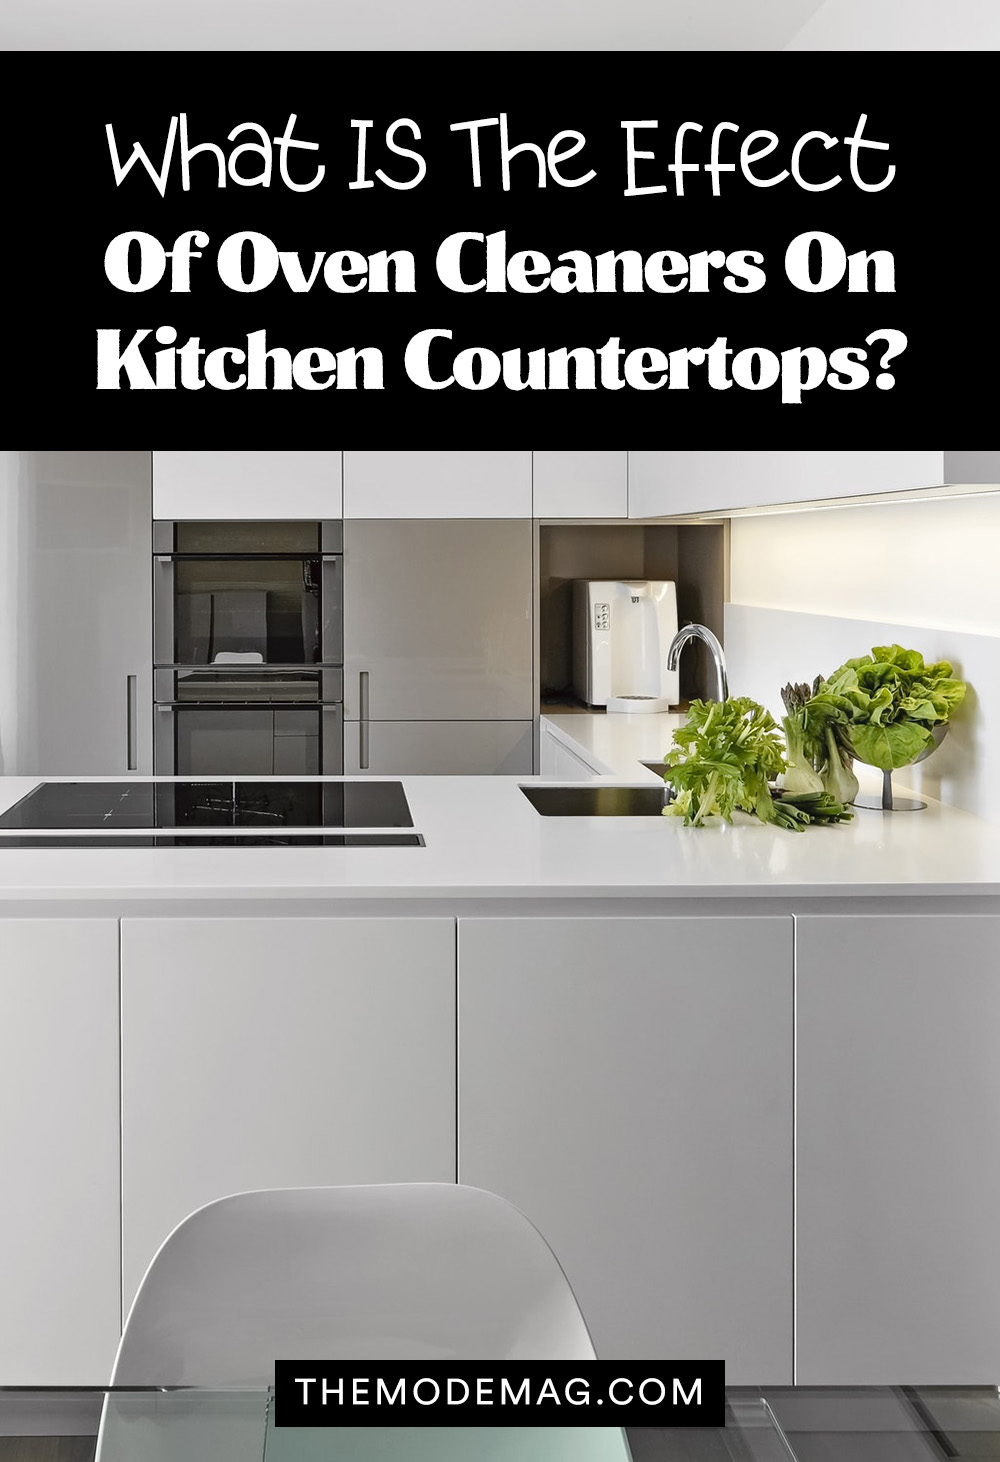 What Is The Effect Of Oven Cleaners On Kitchen Countertops?